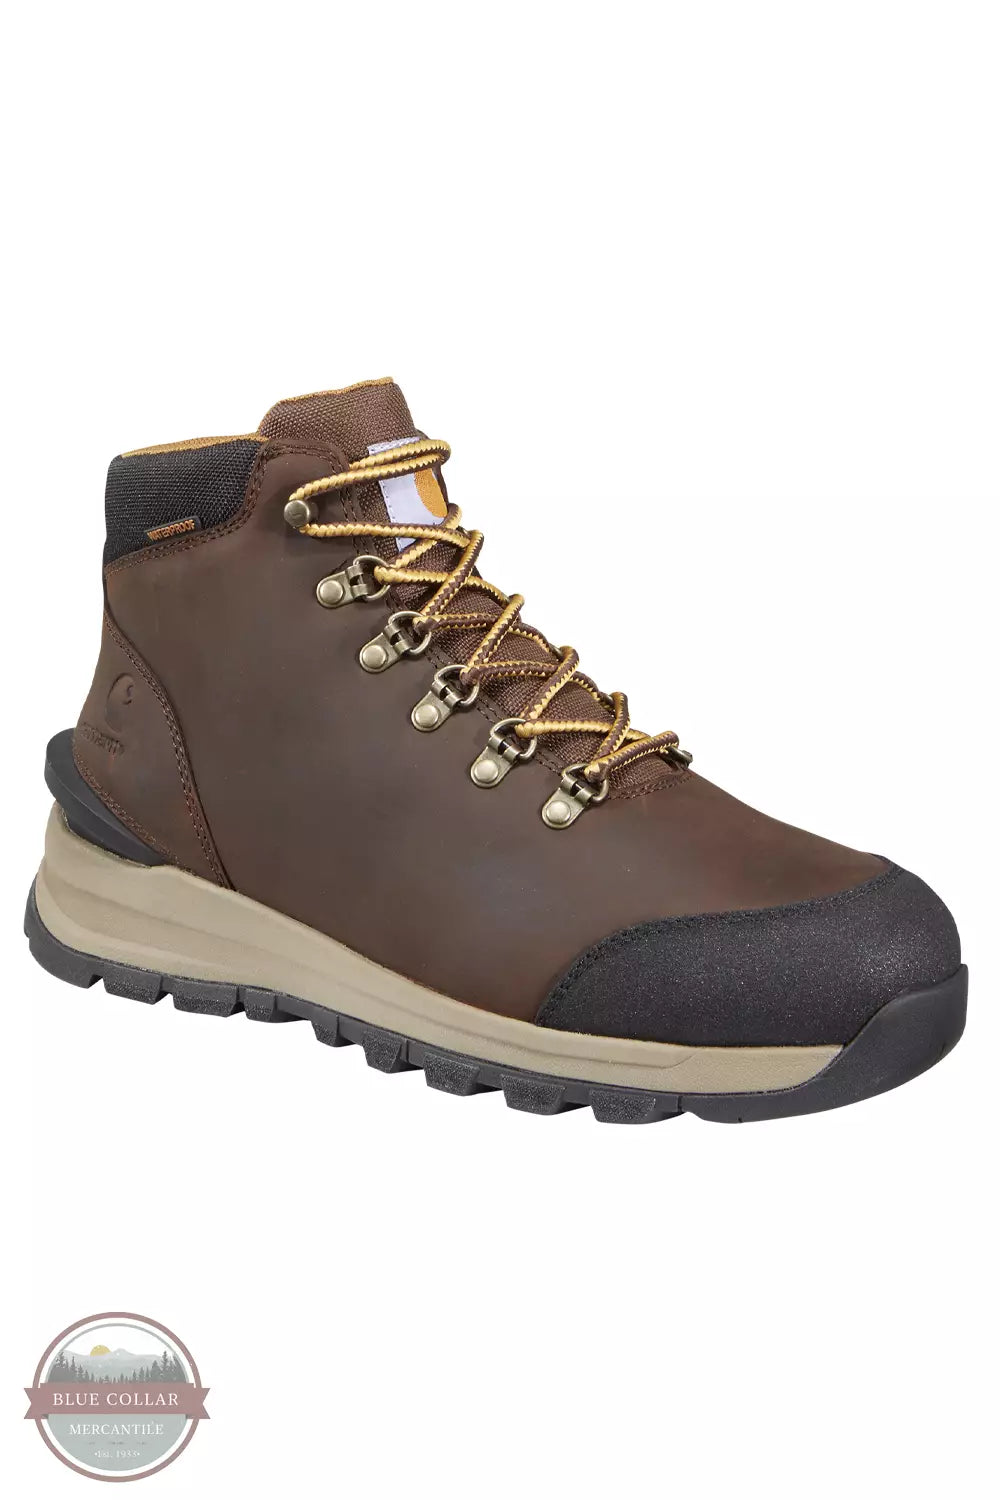 Carhartt FH5550 Gilmore 5 Inch Alloy Toe Work Hiker in Dark Brown Profile View